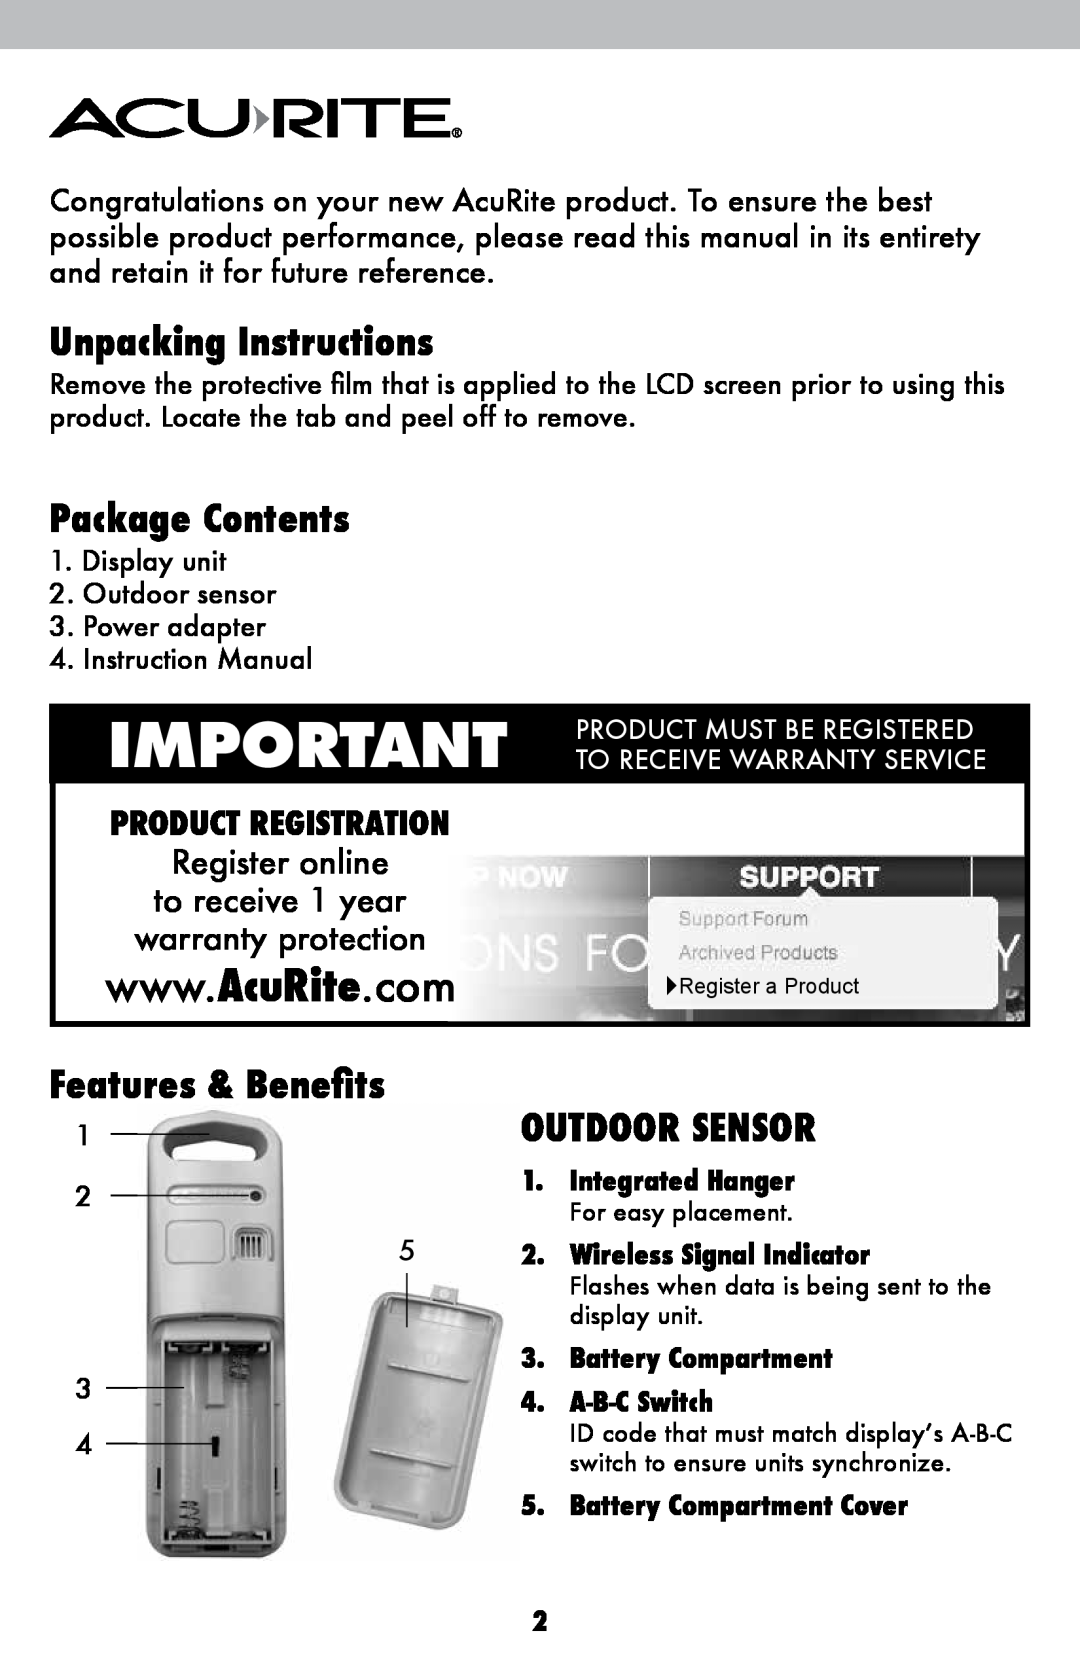 Acu-Rite 2027 Unpacking Instructions, Package Contents, Outdoor Sensor, Product Must Be Registered, Product Registration 